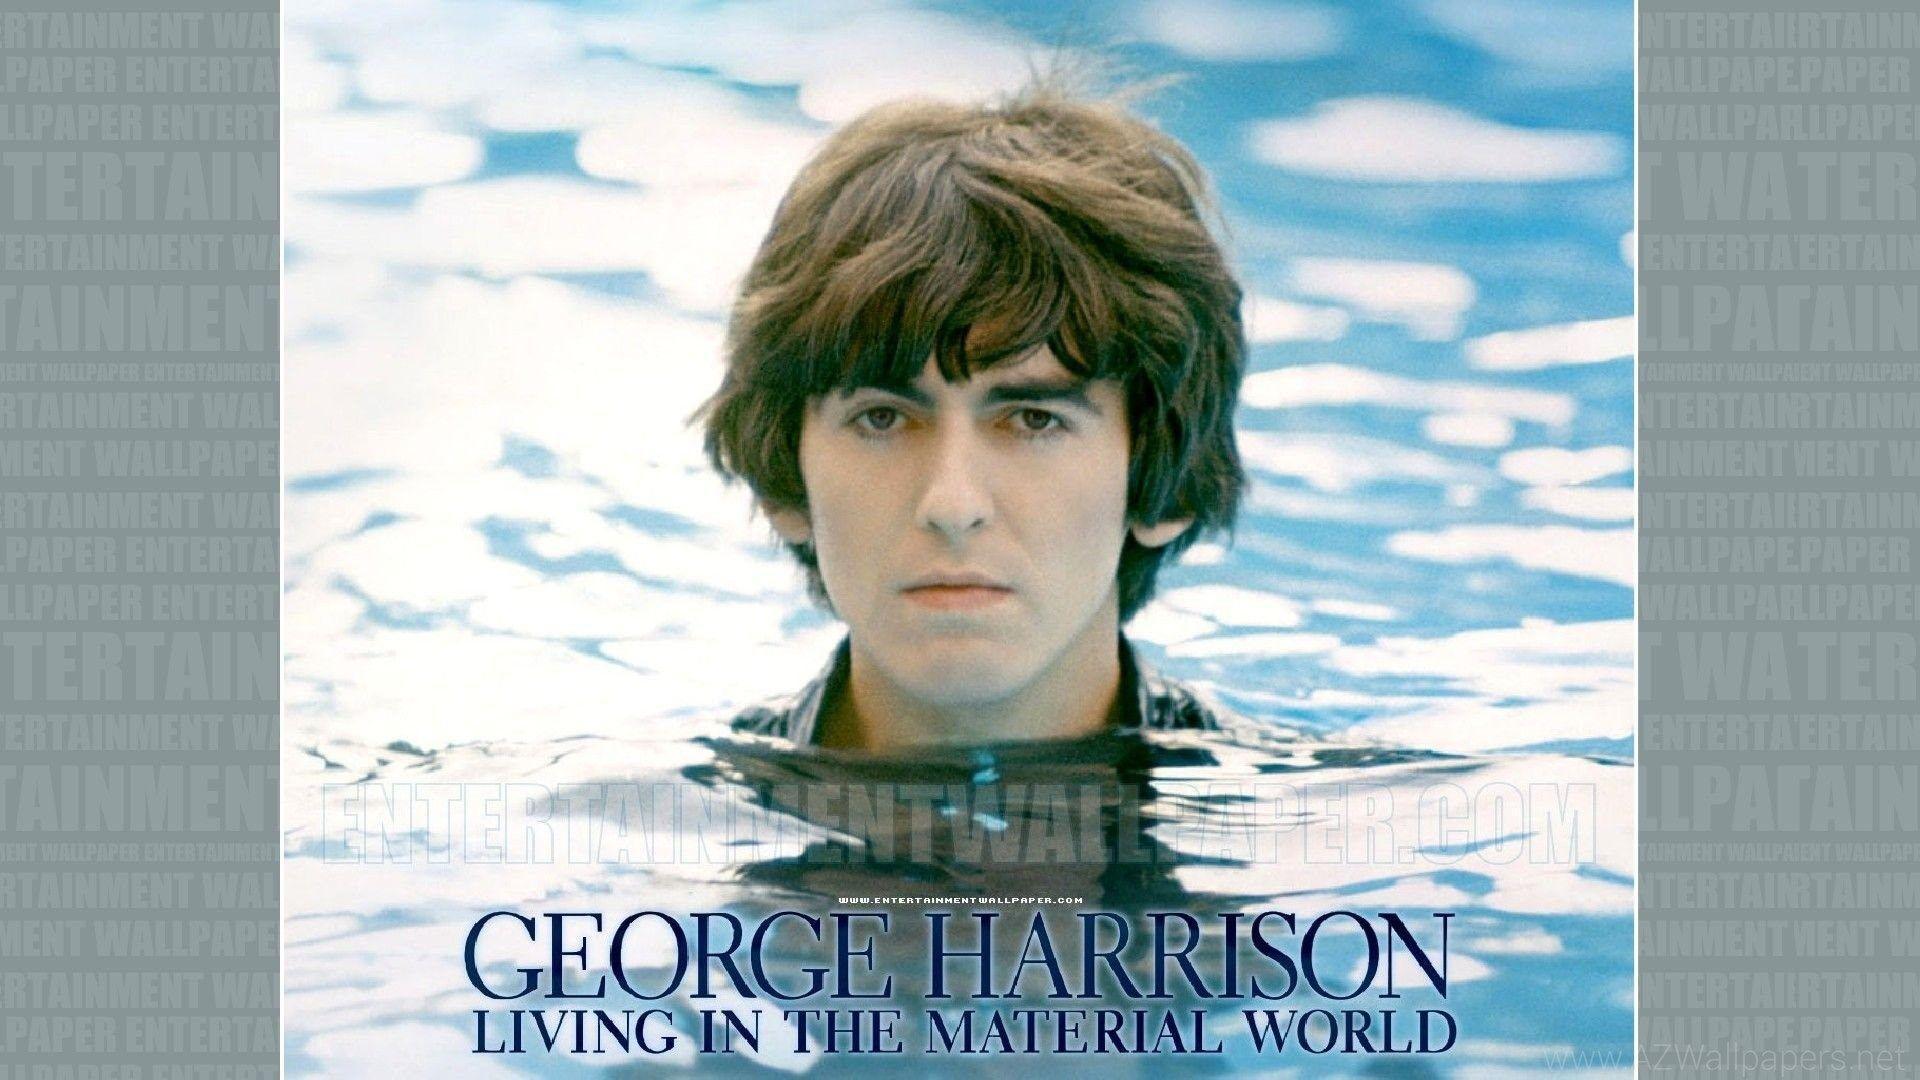 George Harrison: Living In The Material World Wallpaper